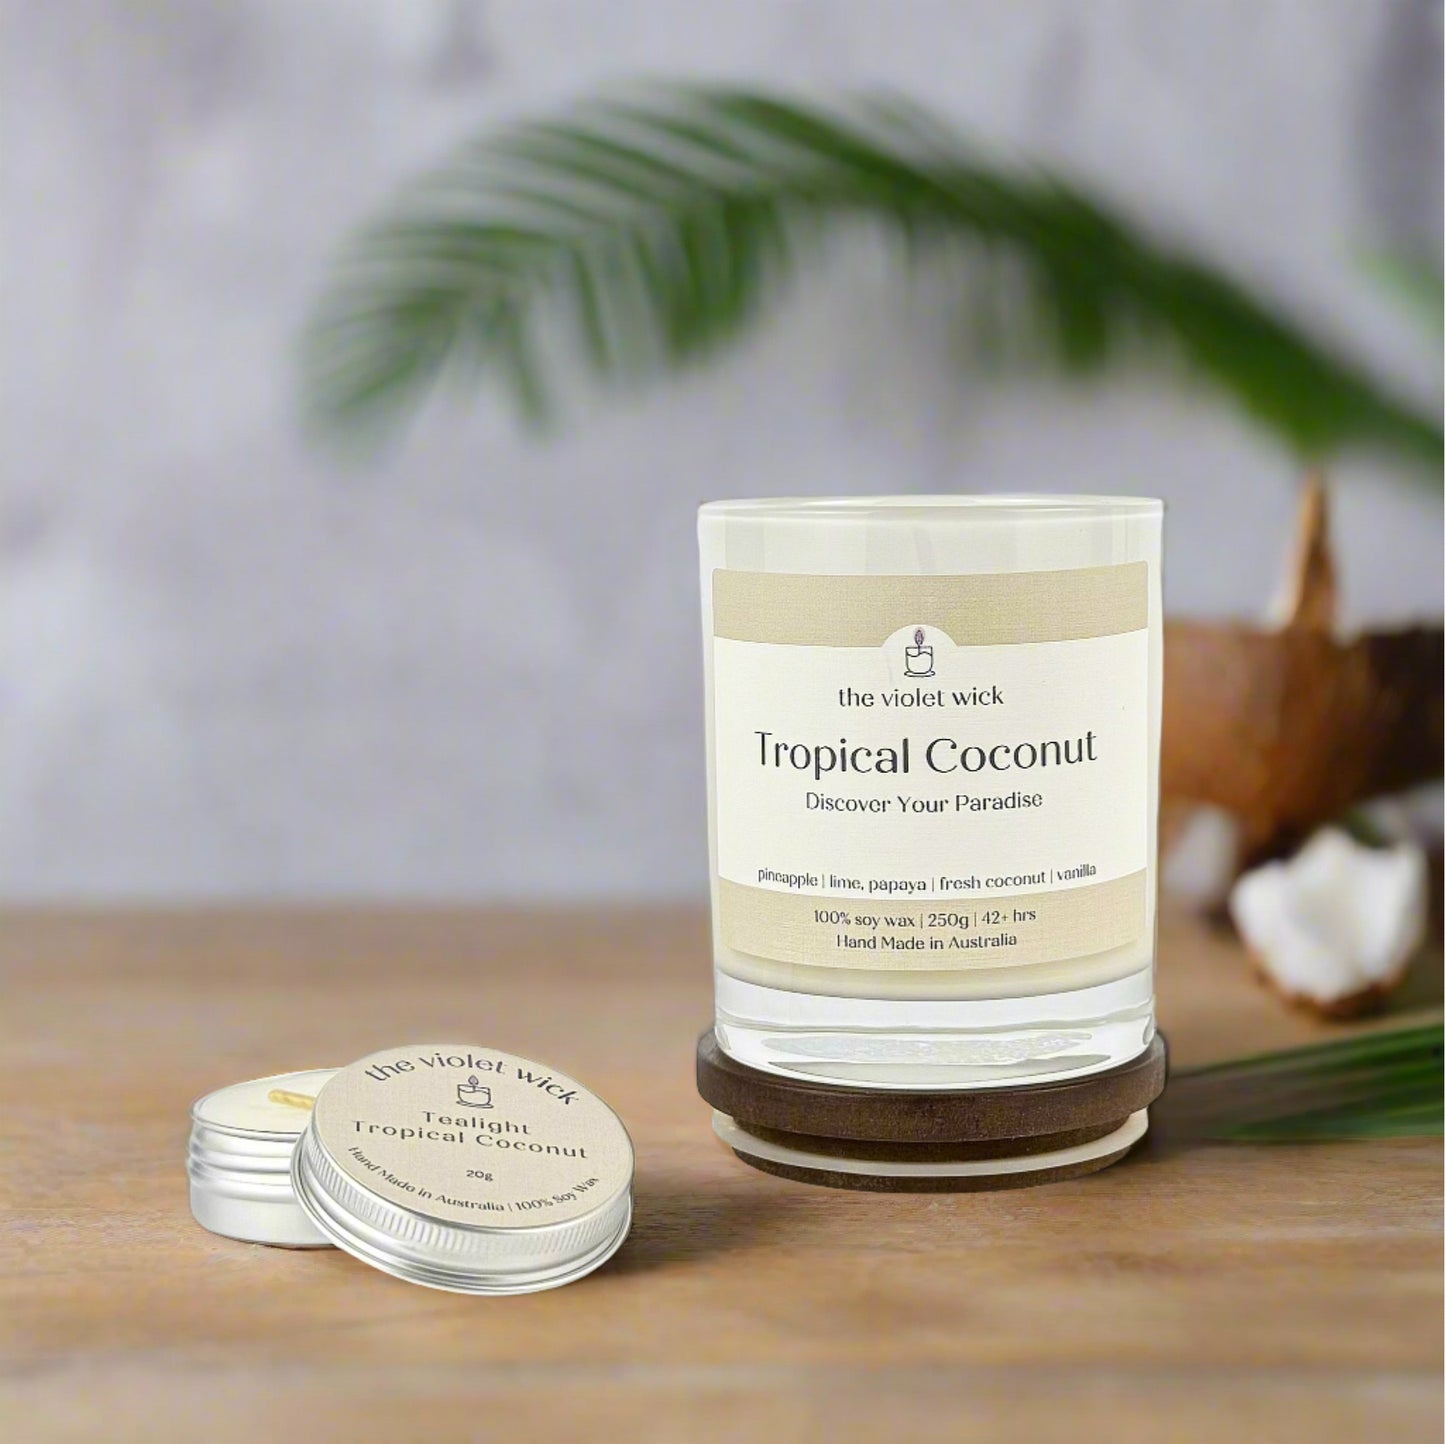 Tropical Coconut Soy candle and tealight from The Violet Wick